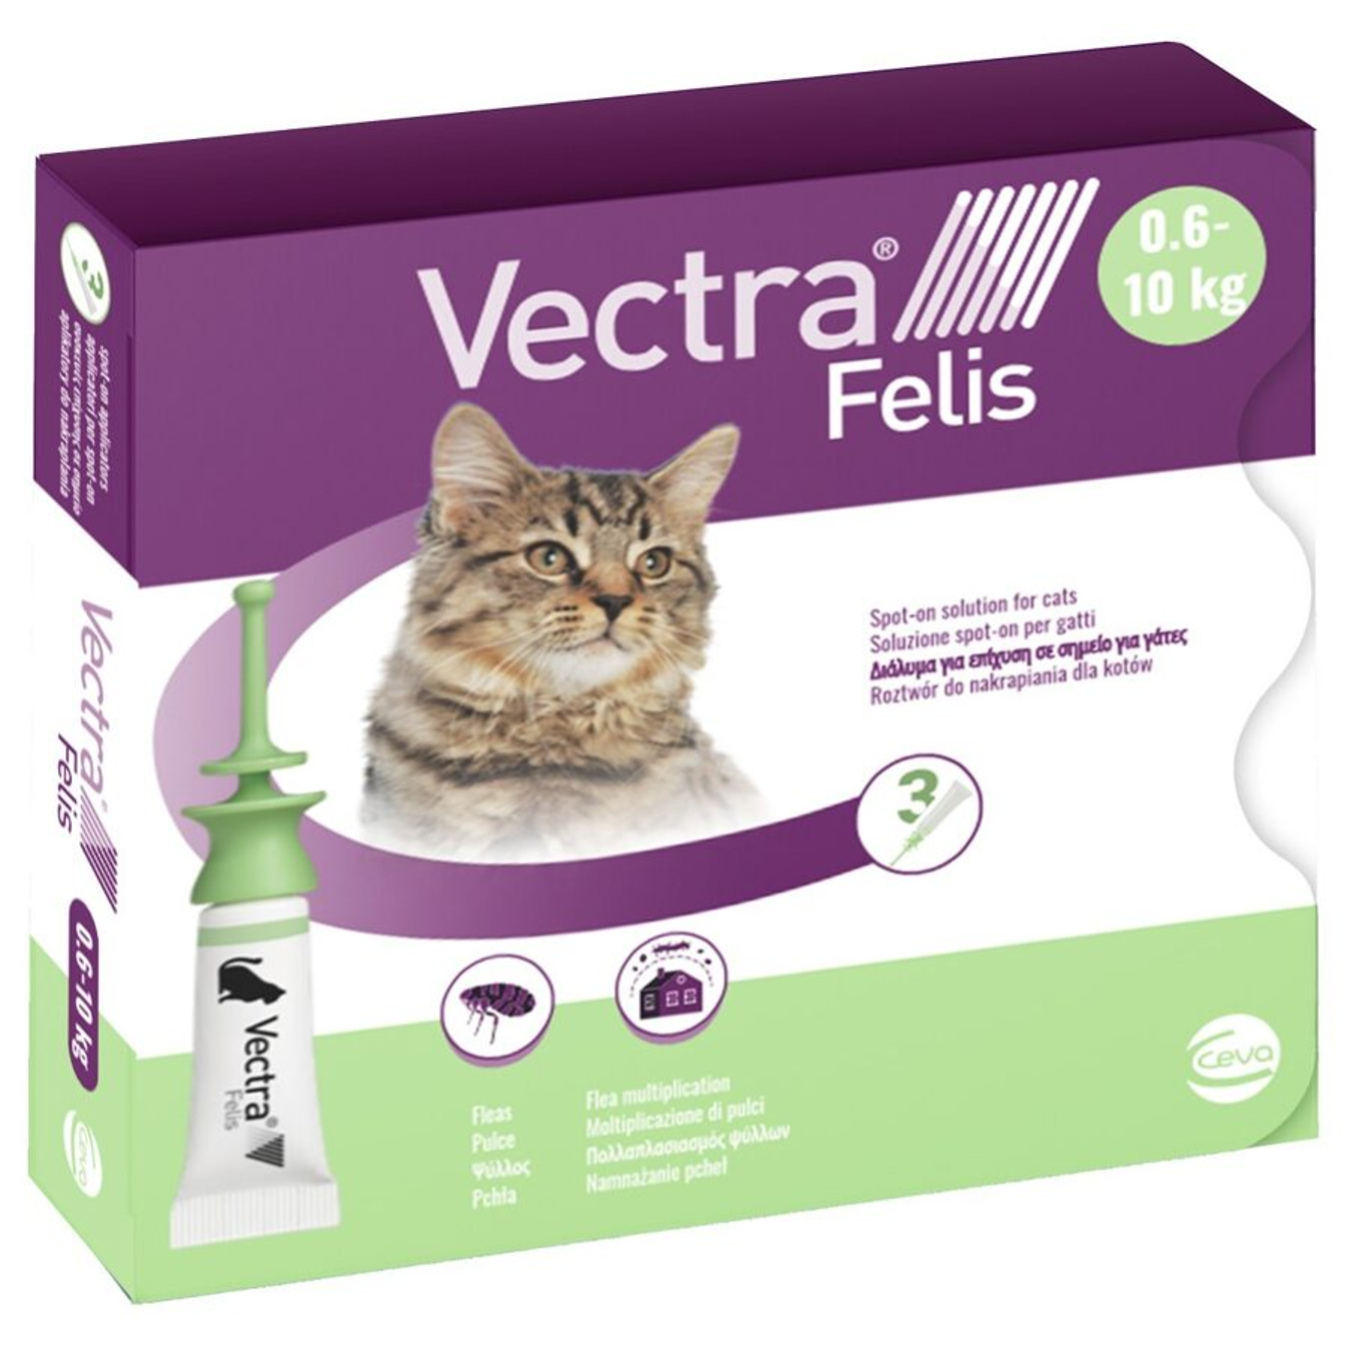 VECTRA FELIS For The Treatment and Control of External Parasite Infestation in Cats, 3 Applicators